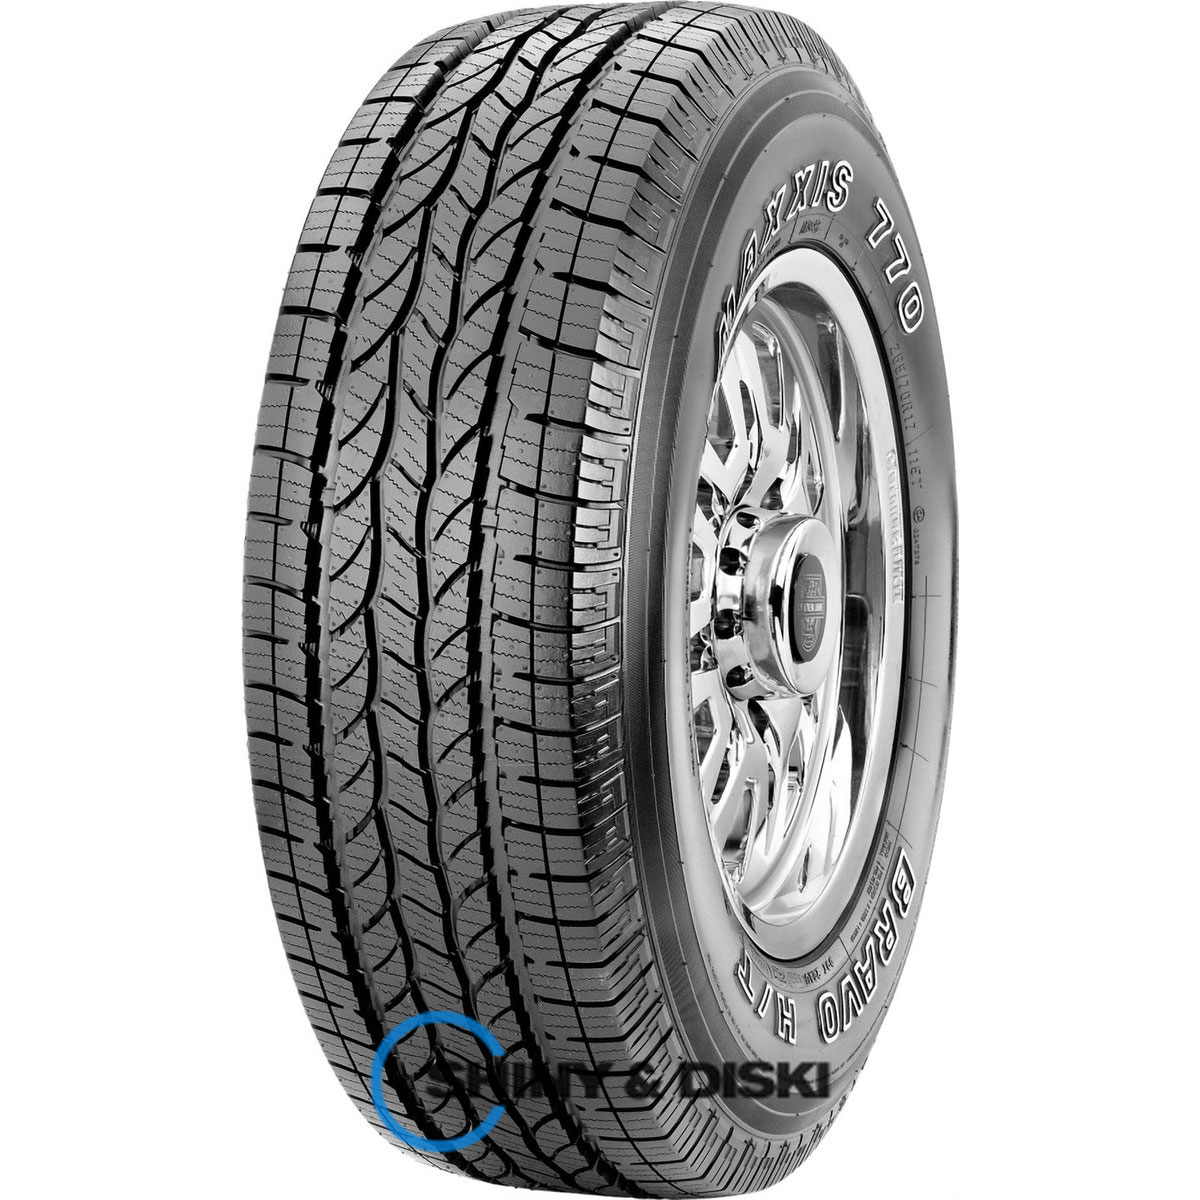 maxxis ht-770 235/75 r16 112s